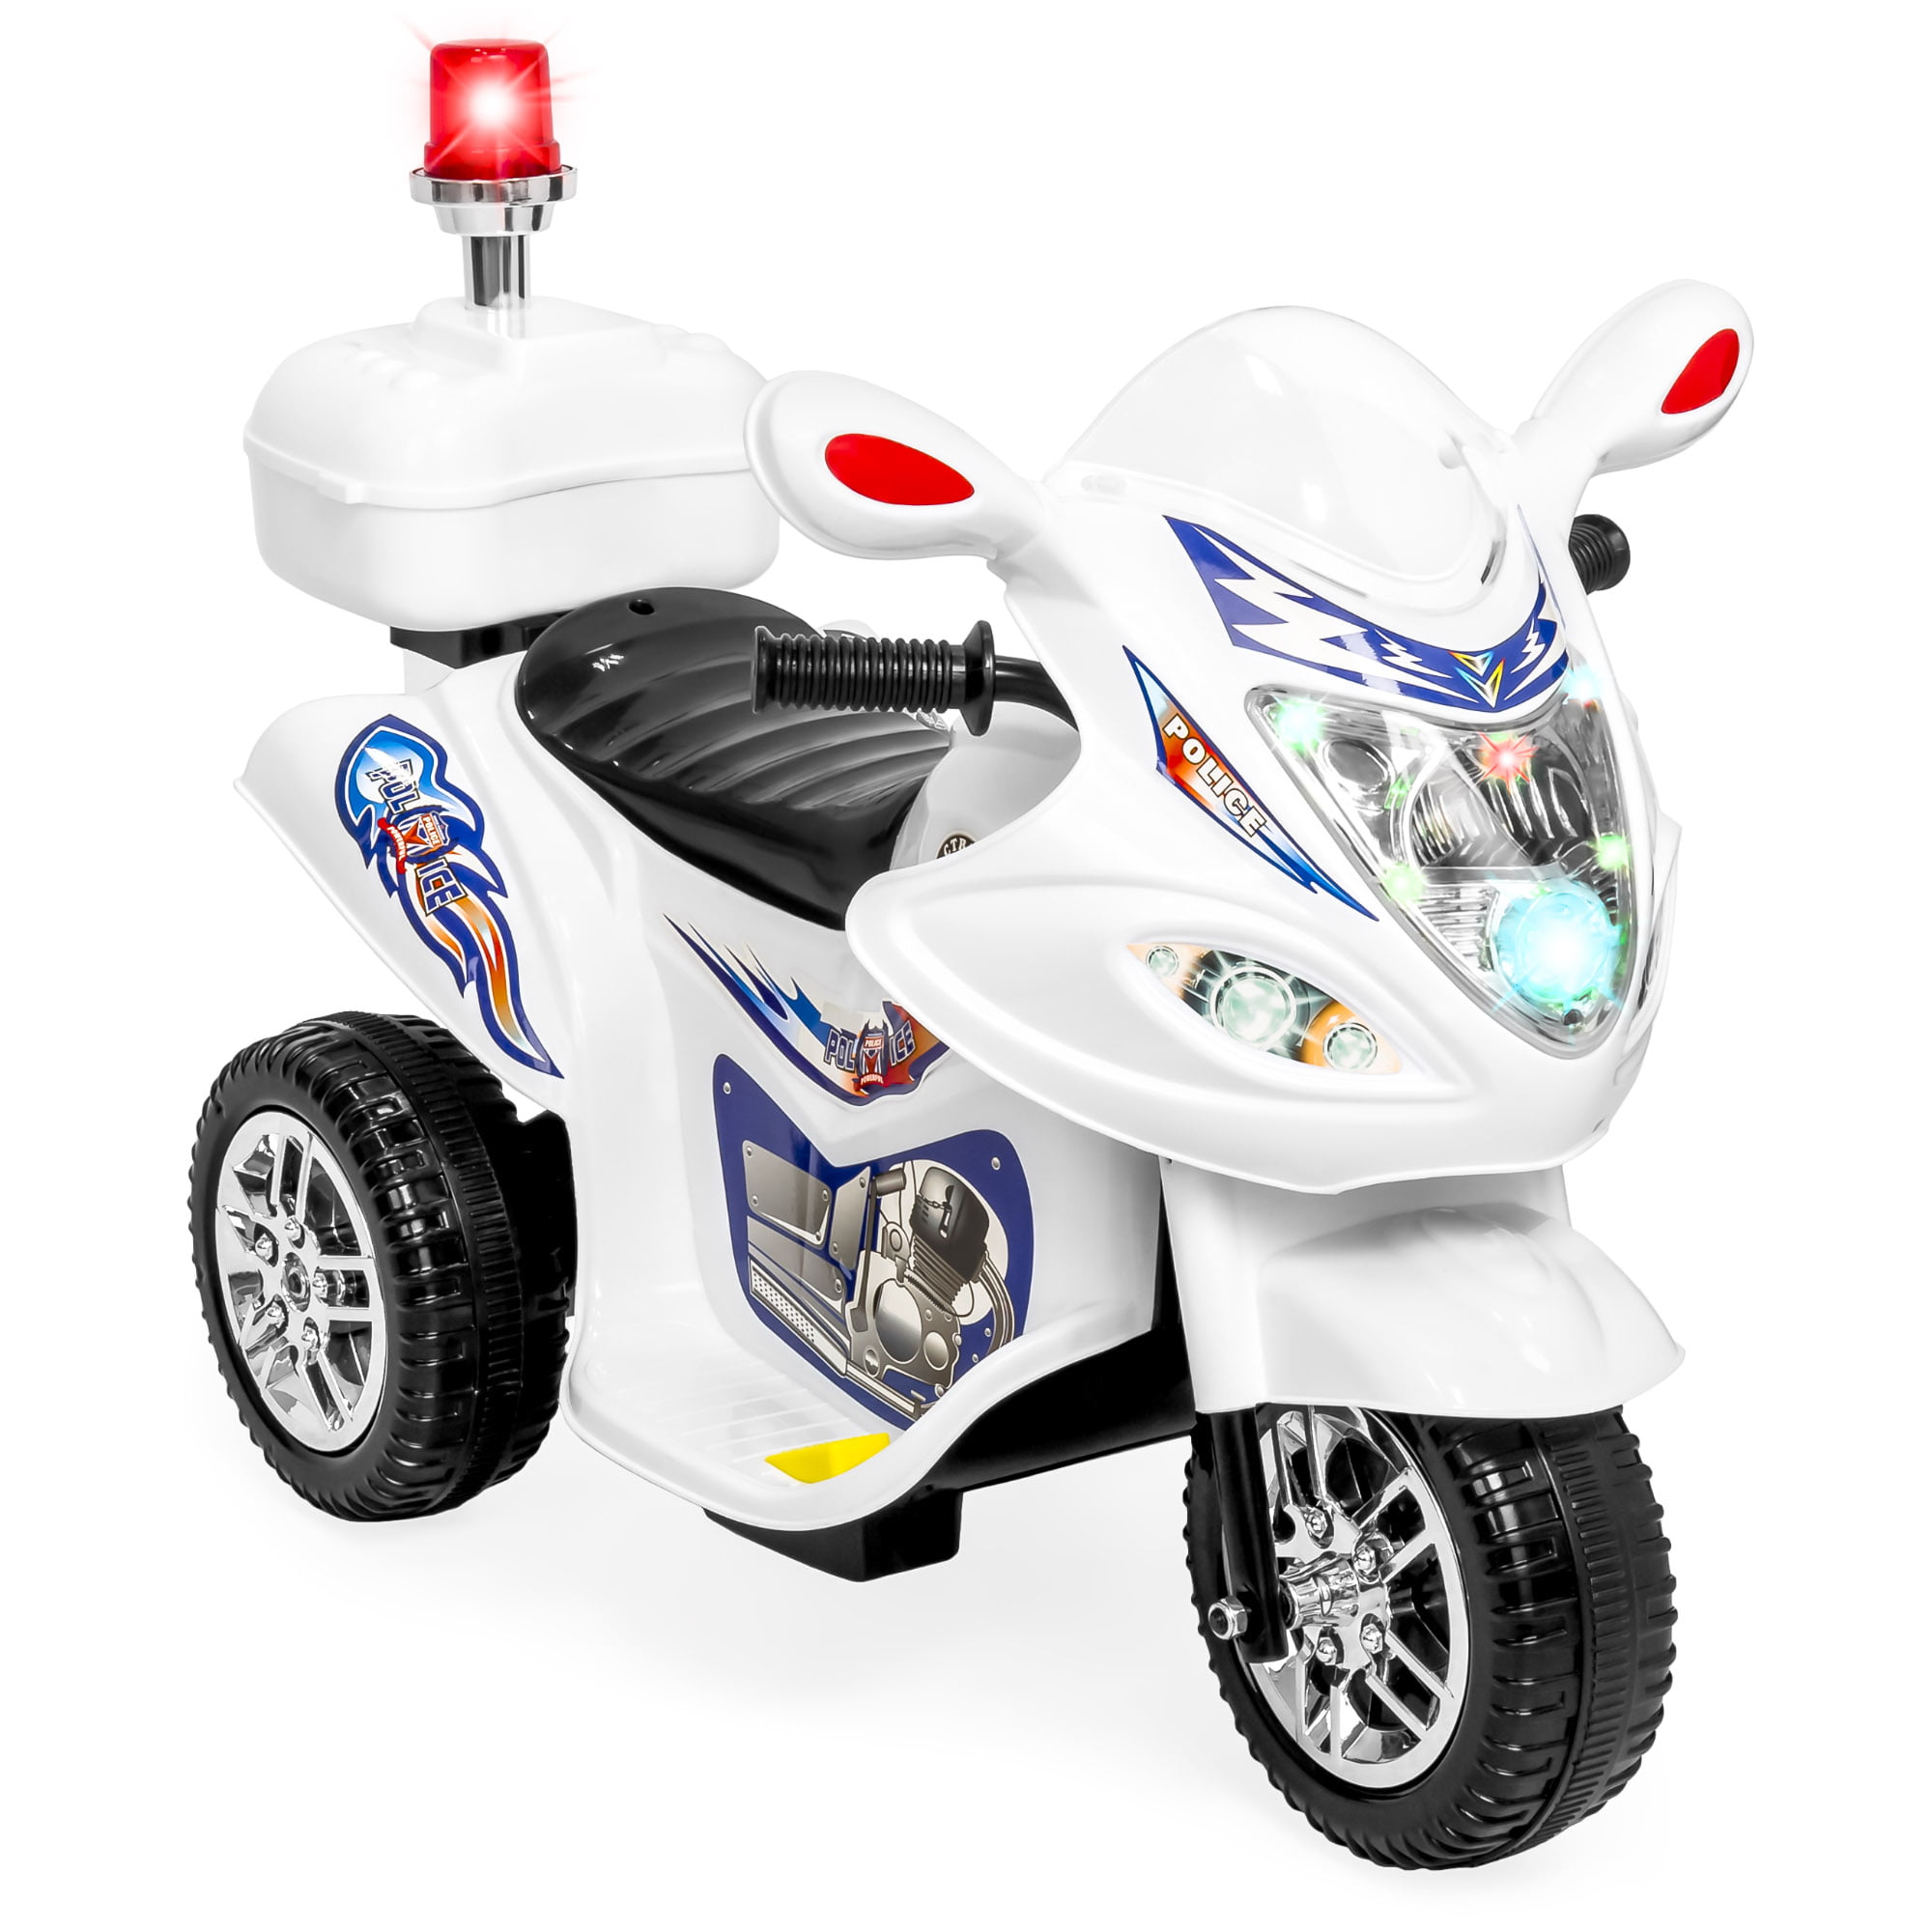 6 volt ride on police motorcycle